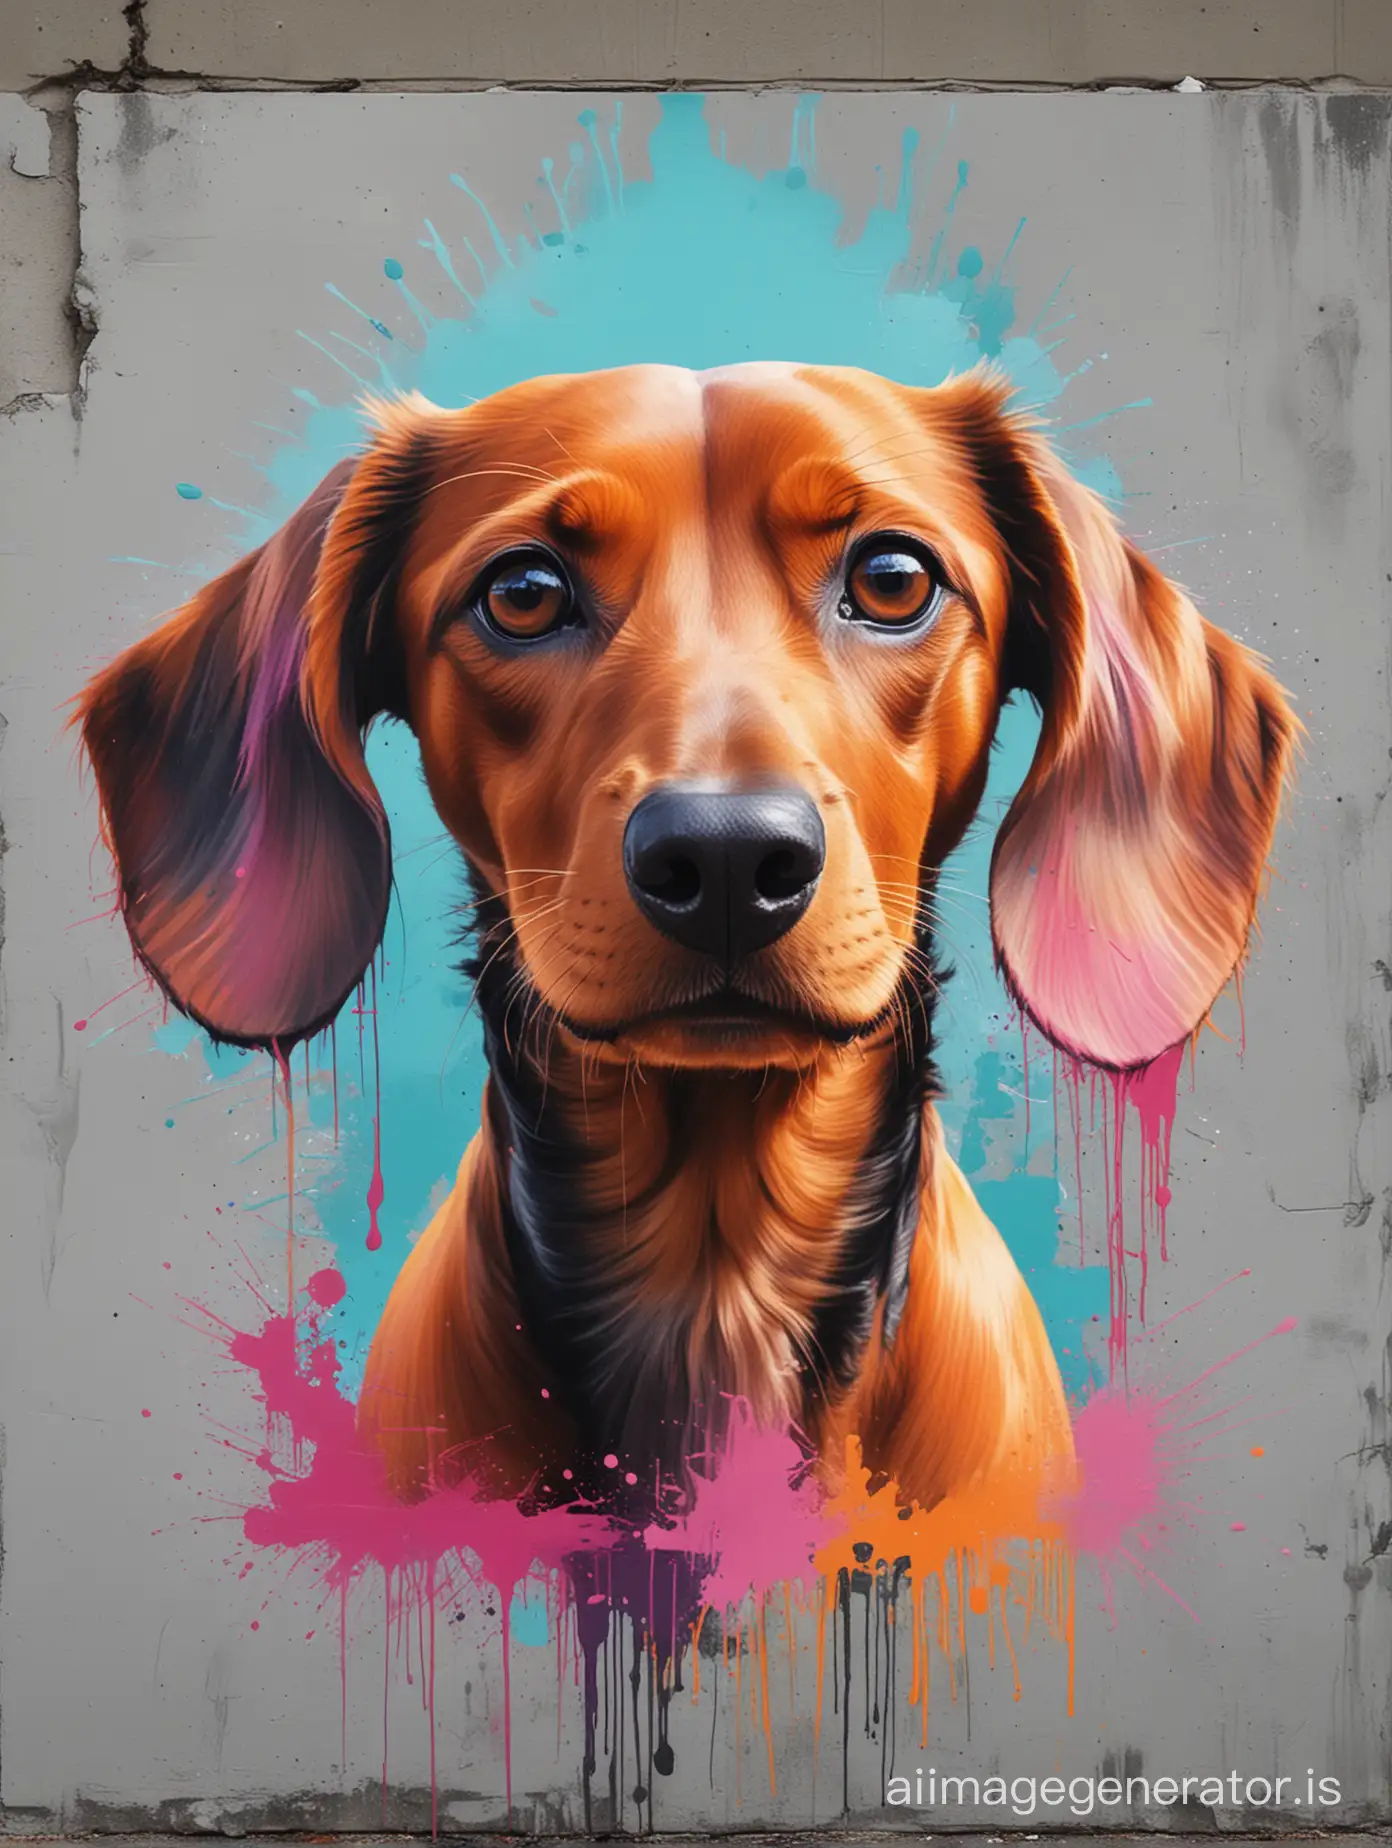 A captivating abstract and conceptual artwork of a vibrant dachshund, with colors blending from front to back. The dog's face is a dynamic and layered representation of colors, starting with an intense orange and cyan blend at the front. The colors transition to a cool gray and finally warm up to become a mix of orange and pink at the back. The painting incorporates graffiti-inspired brushstrokes, creating an energetic and lively atmosphere. The overall ambiance of the painting is conceptual art, with a touch of urban street art.